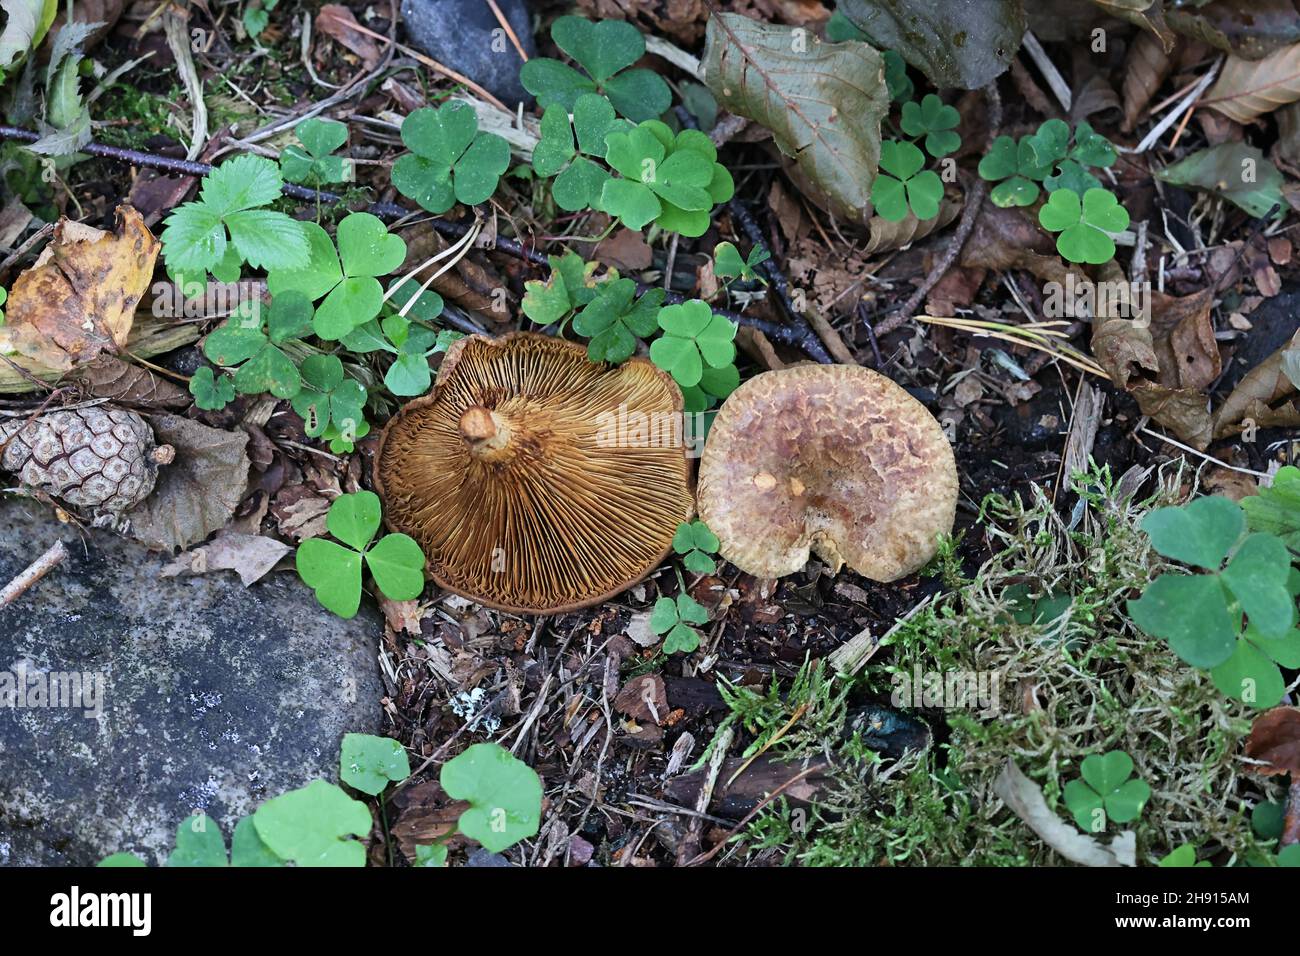 Paxillus filamentosus, also called Paxillus rubicundulus, commonly known as alder roll-rim, wild mushroom from Finland Stock Photo